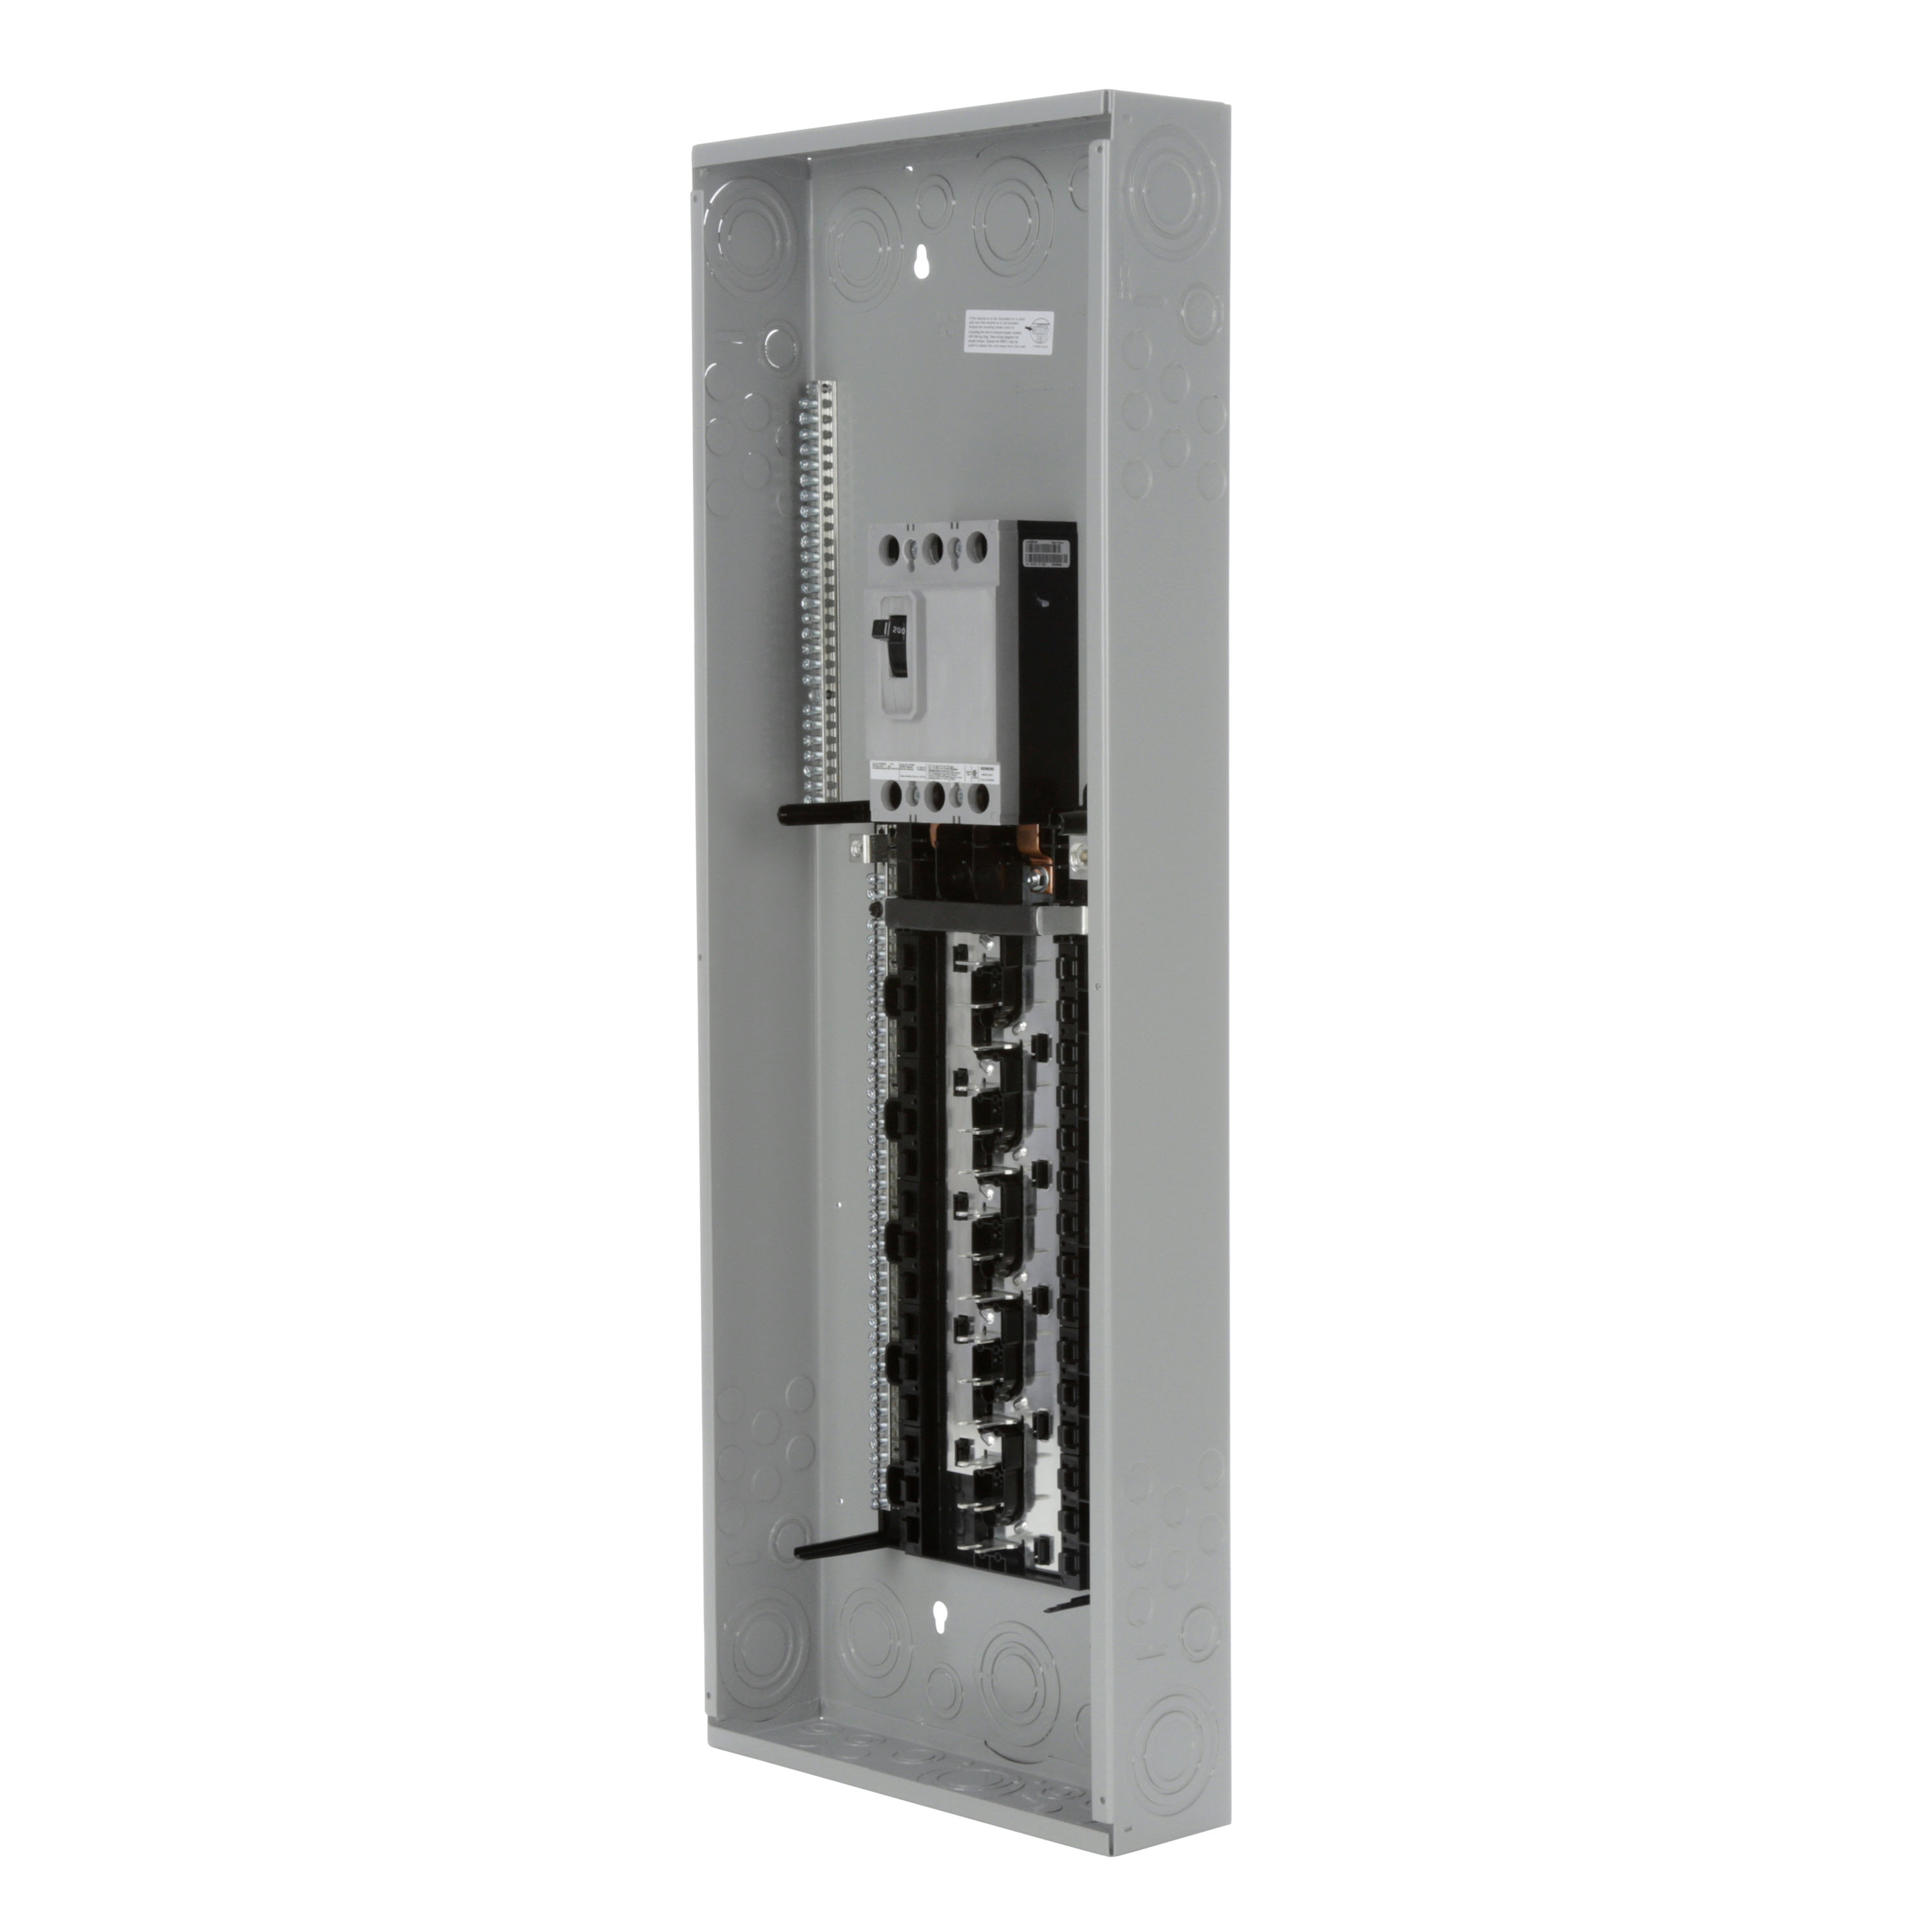 SIEMENS LOW VOLTAGE PL SERIES LOAD CENTER. FACTORY INSTALLED MAIN BREAKER WITH 30 1-INCH SPACES ALLOWING MAX 54 CIRCUITS. 3-PHASE 4-WIRE SYSTEM RATED 120/240V OR 120/208V (200A) 22KA INTERRUPT. SPECIAL FEATURES COPPER BUS, INTERCHANGEABLE MAIN, GRAY TRIM, NEMA TYPE1 ENCLOSURE FOR INDOOR USE.